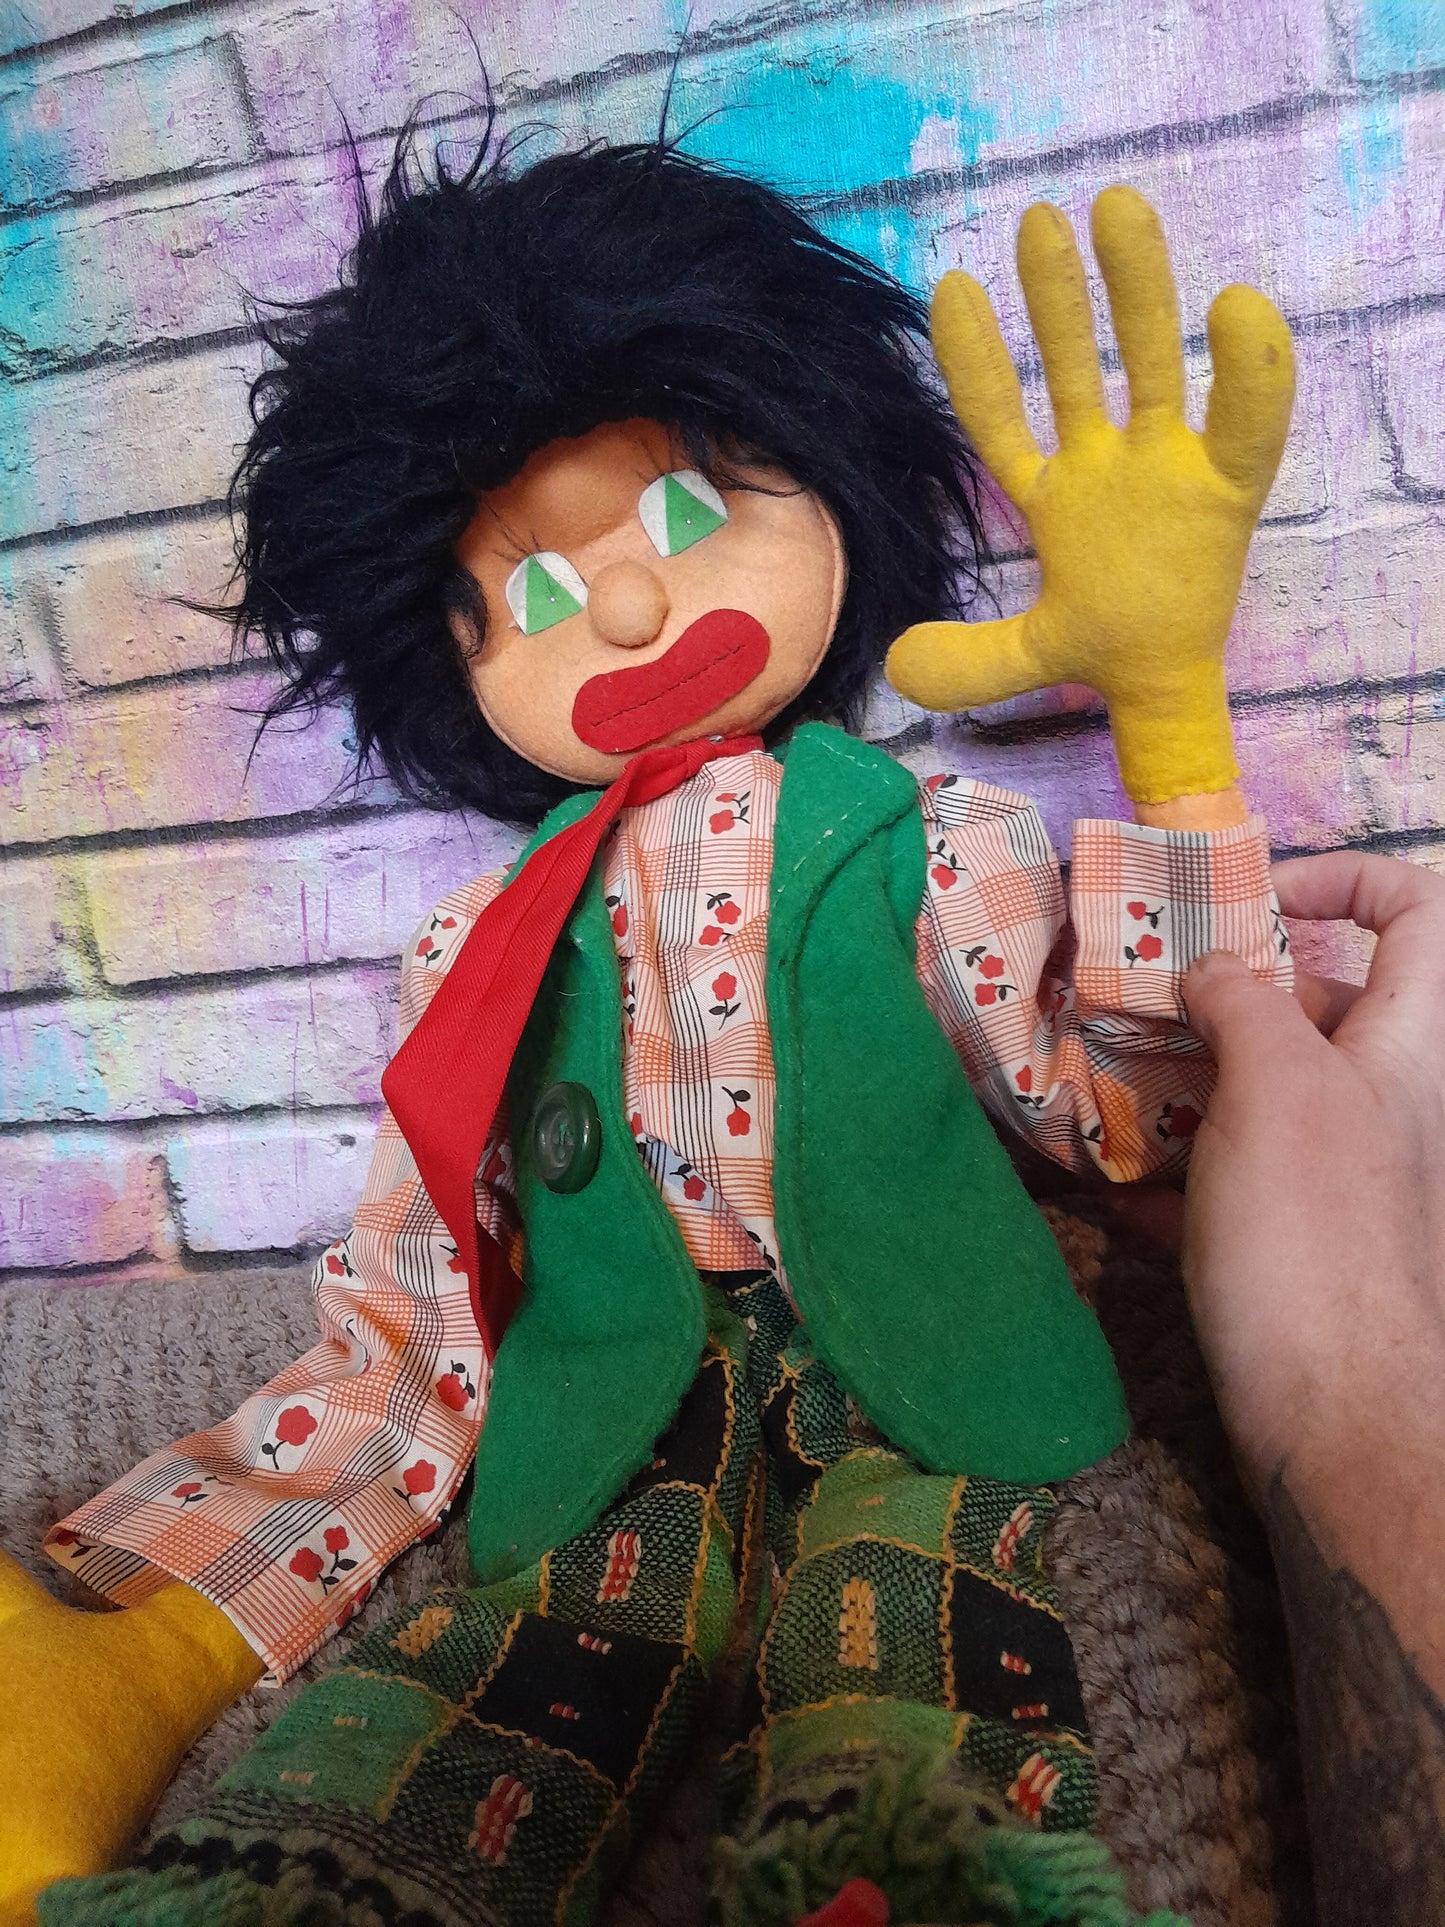 Giant hands doll